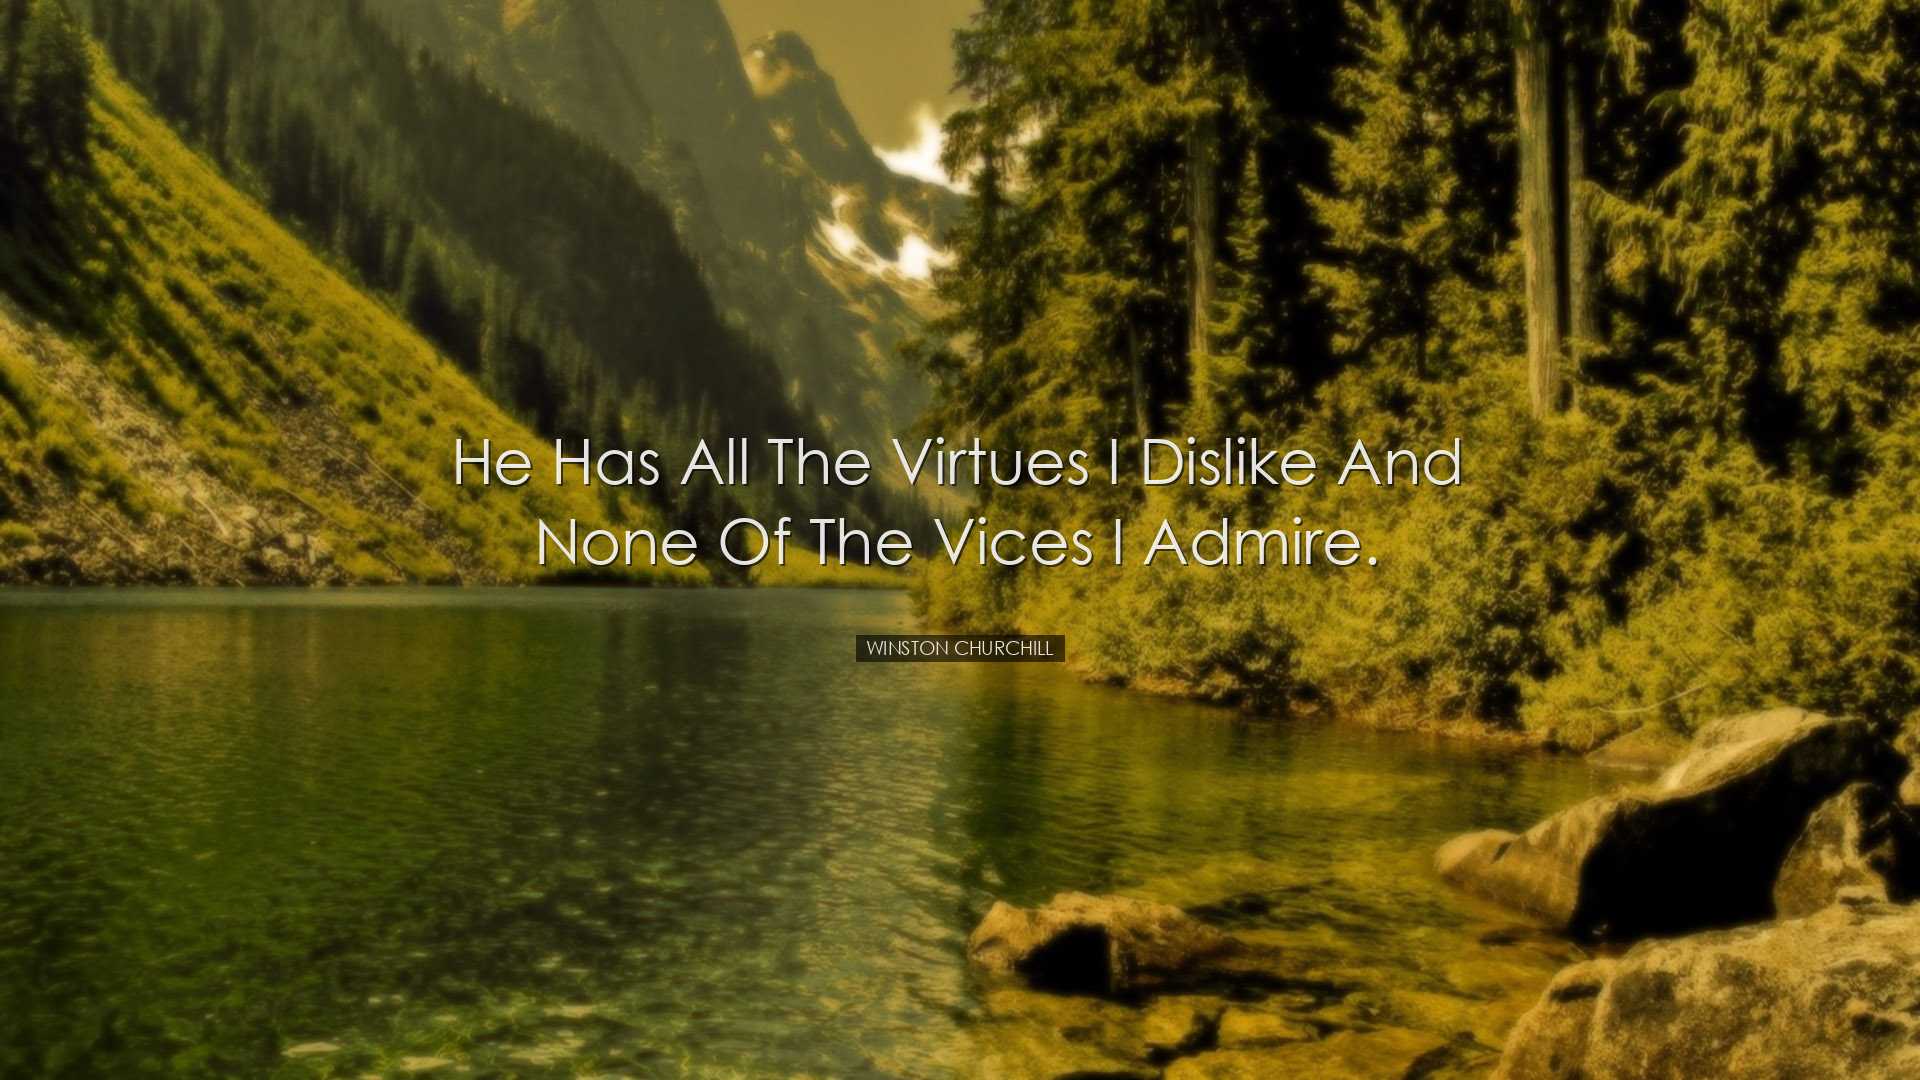 He has all the virtues I dislike and none of the vices I admire. -